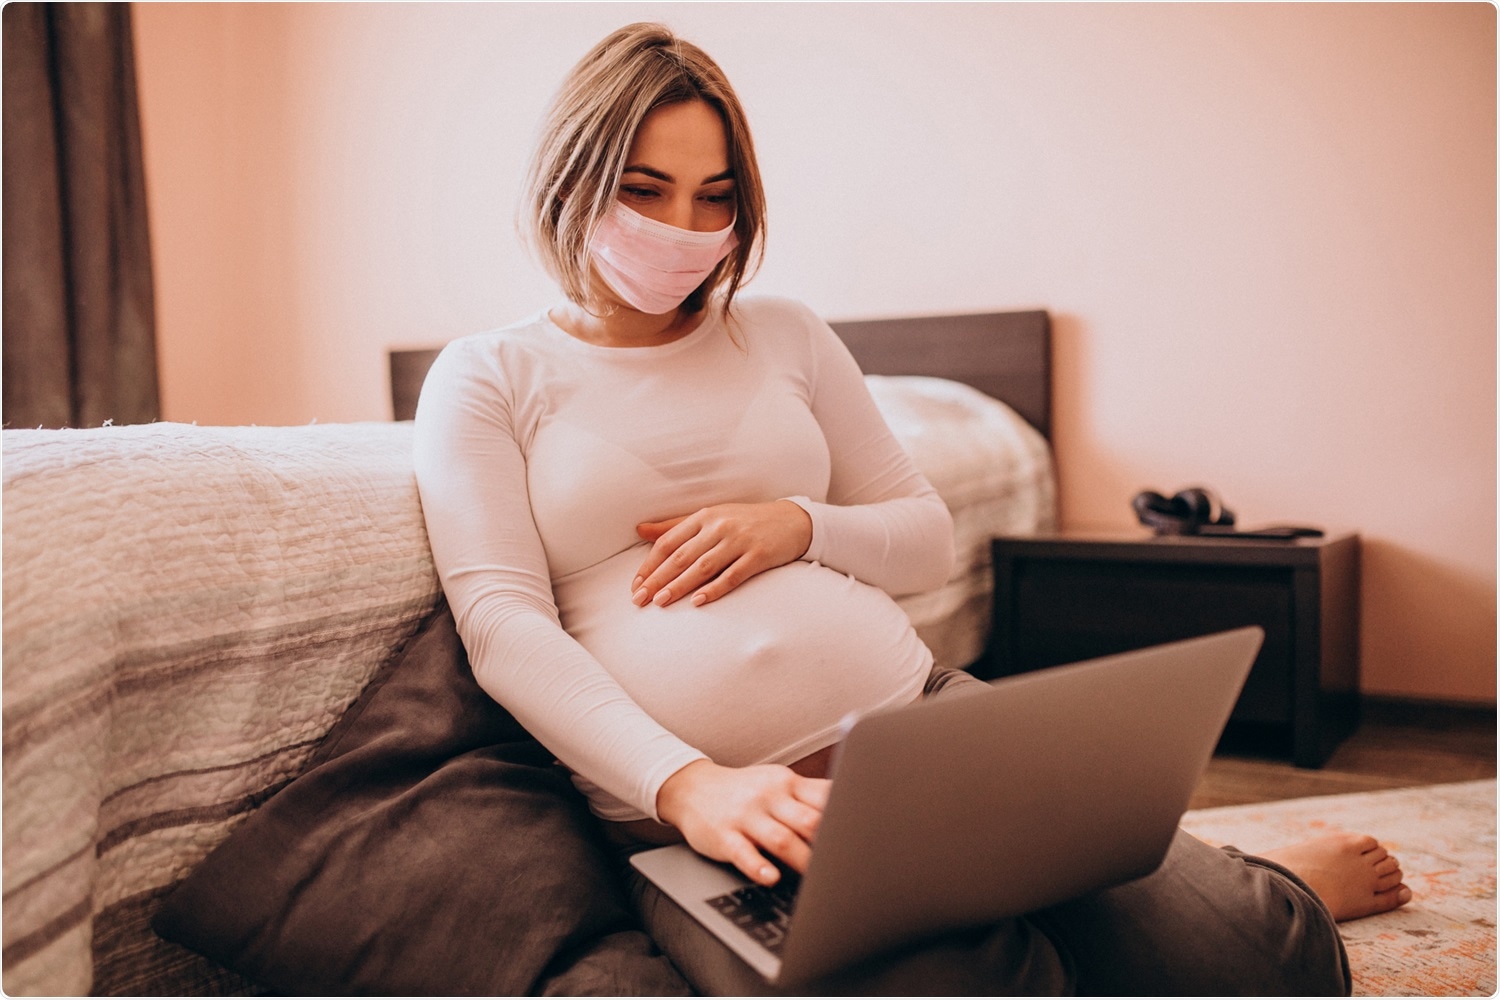 Study: Increase in preterm stillbirths and reduction in iatrogenic preterm births for fetal compromise: a multi-centre cohort study of COVID-19 lockdown effects in Melbourne, Australia. Image Credit: PH888 / Shutterstock